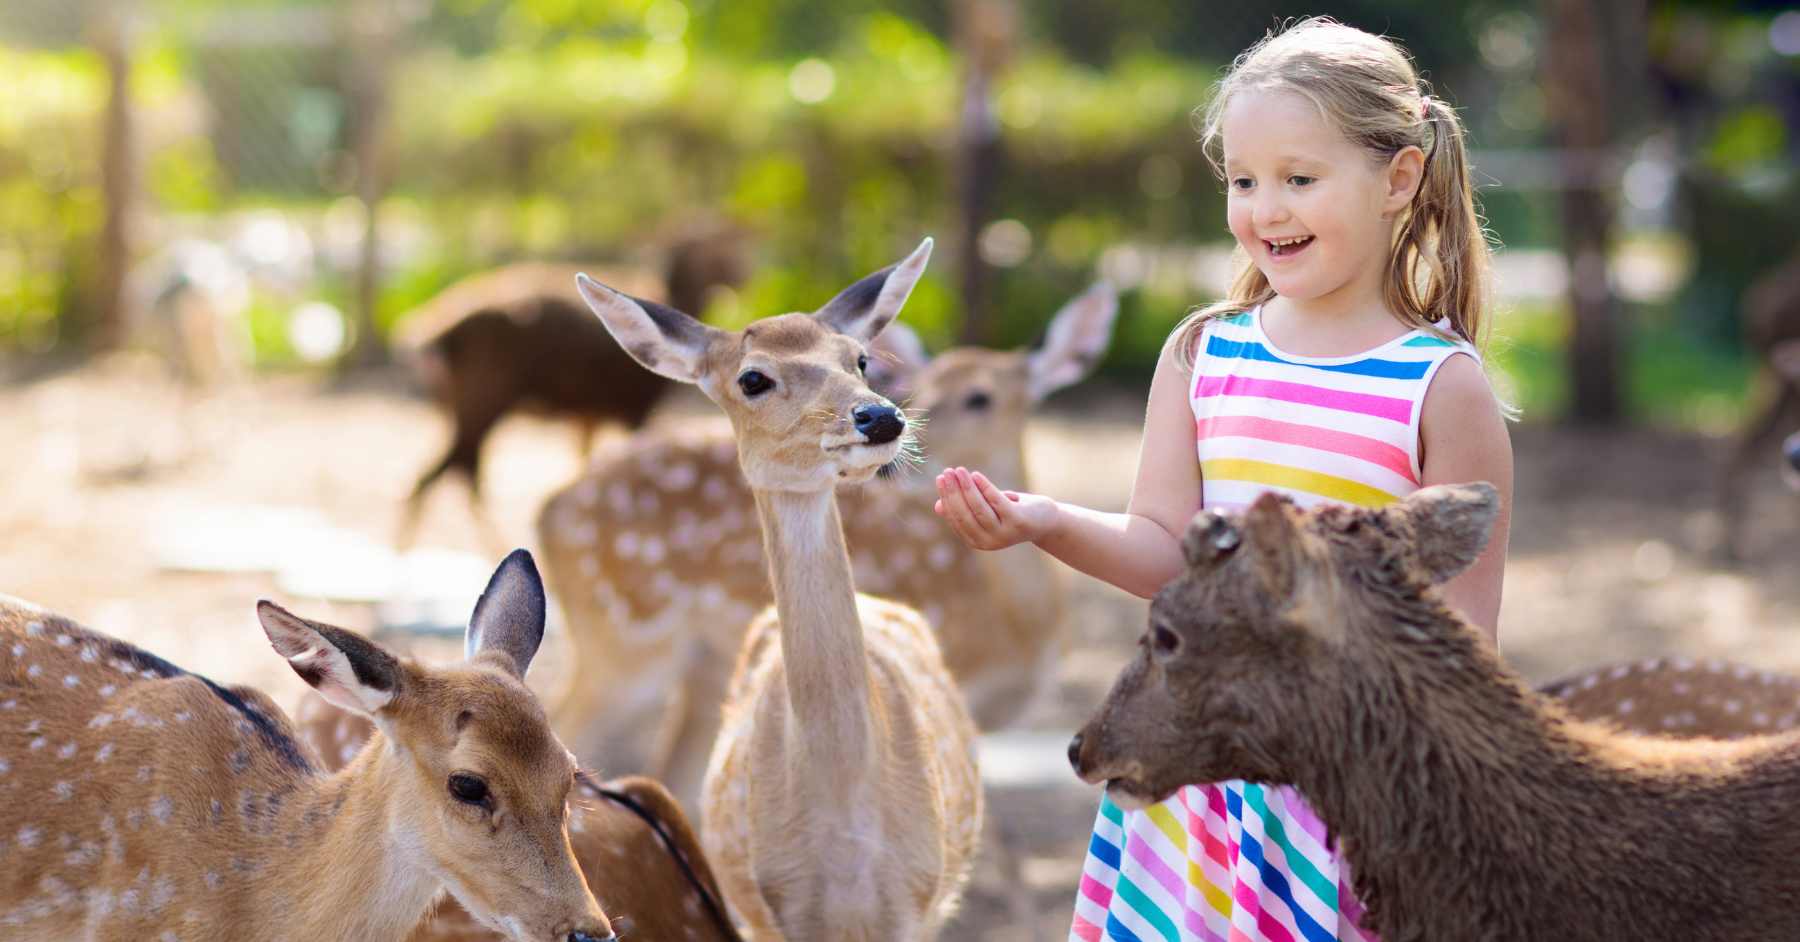 The Best Animal Encounters for NYC Kids